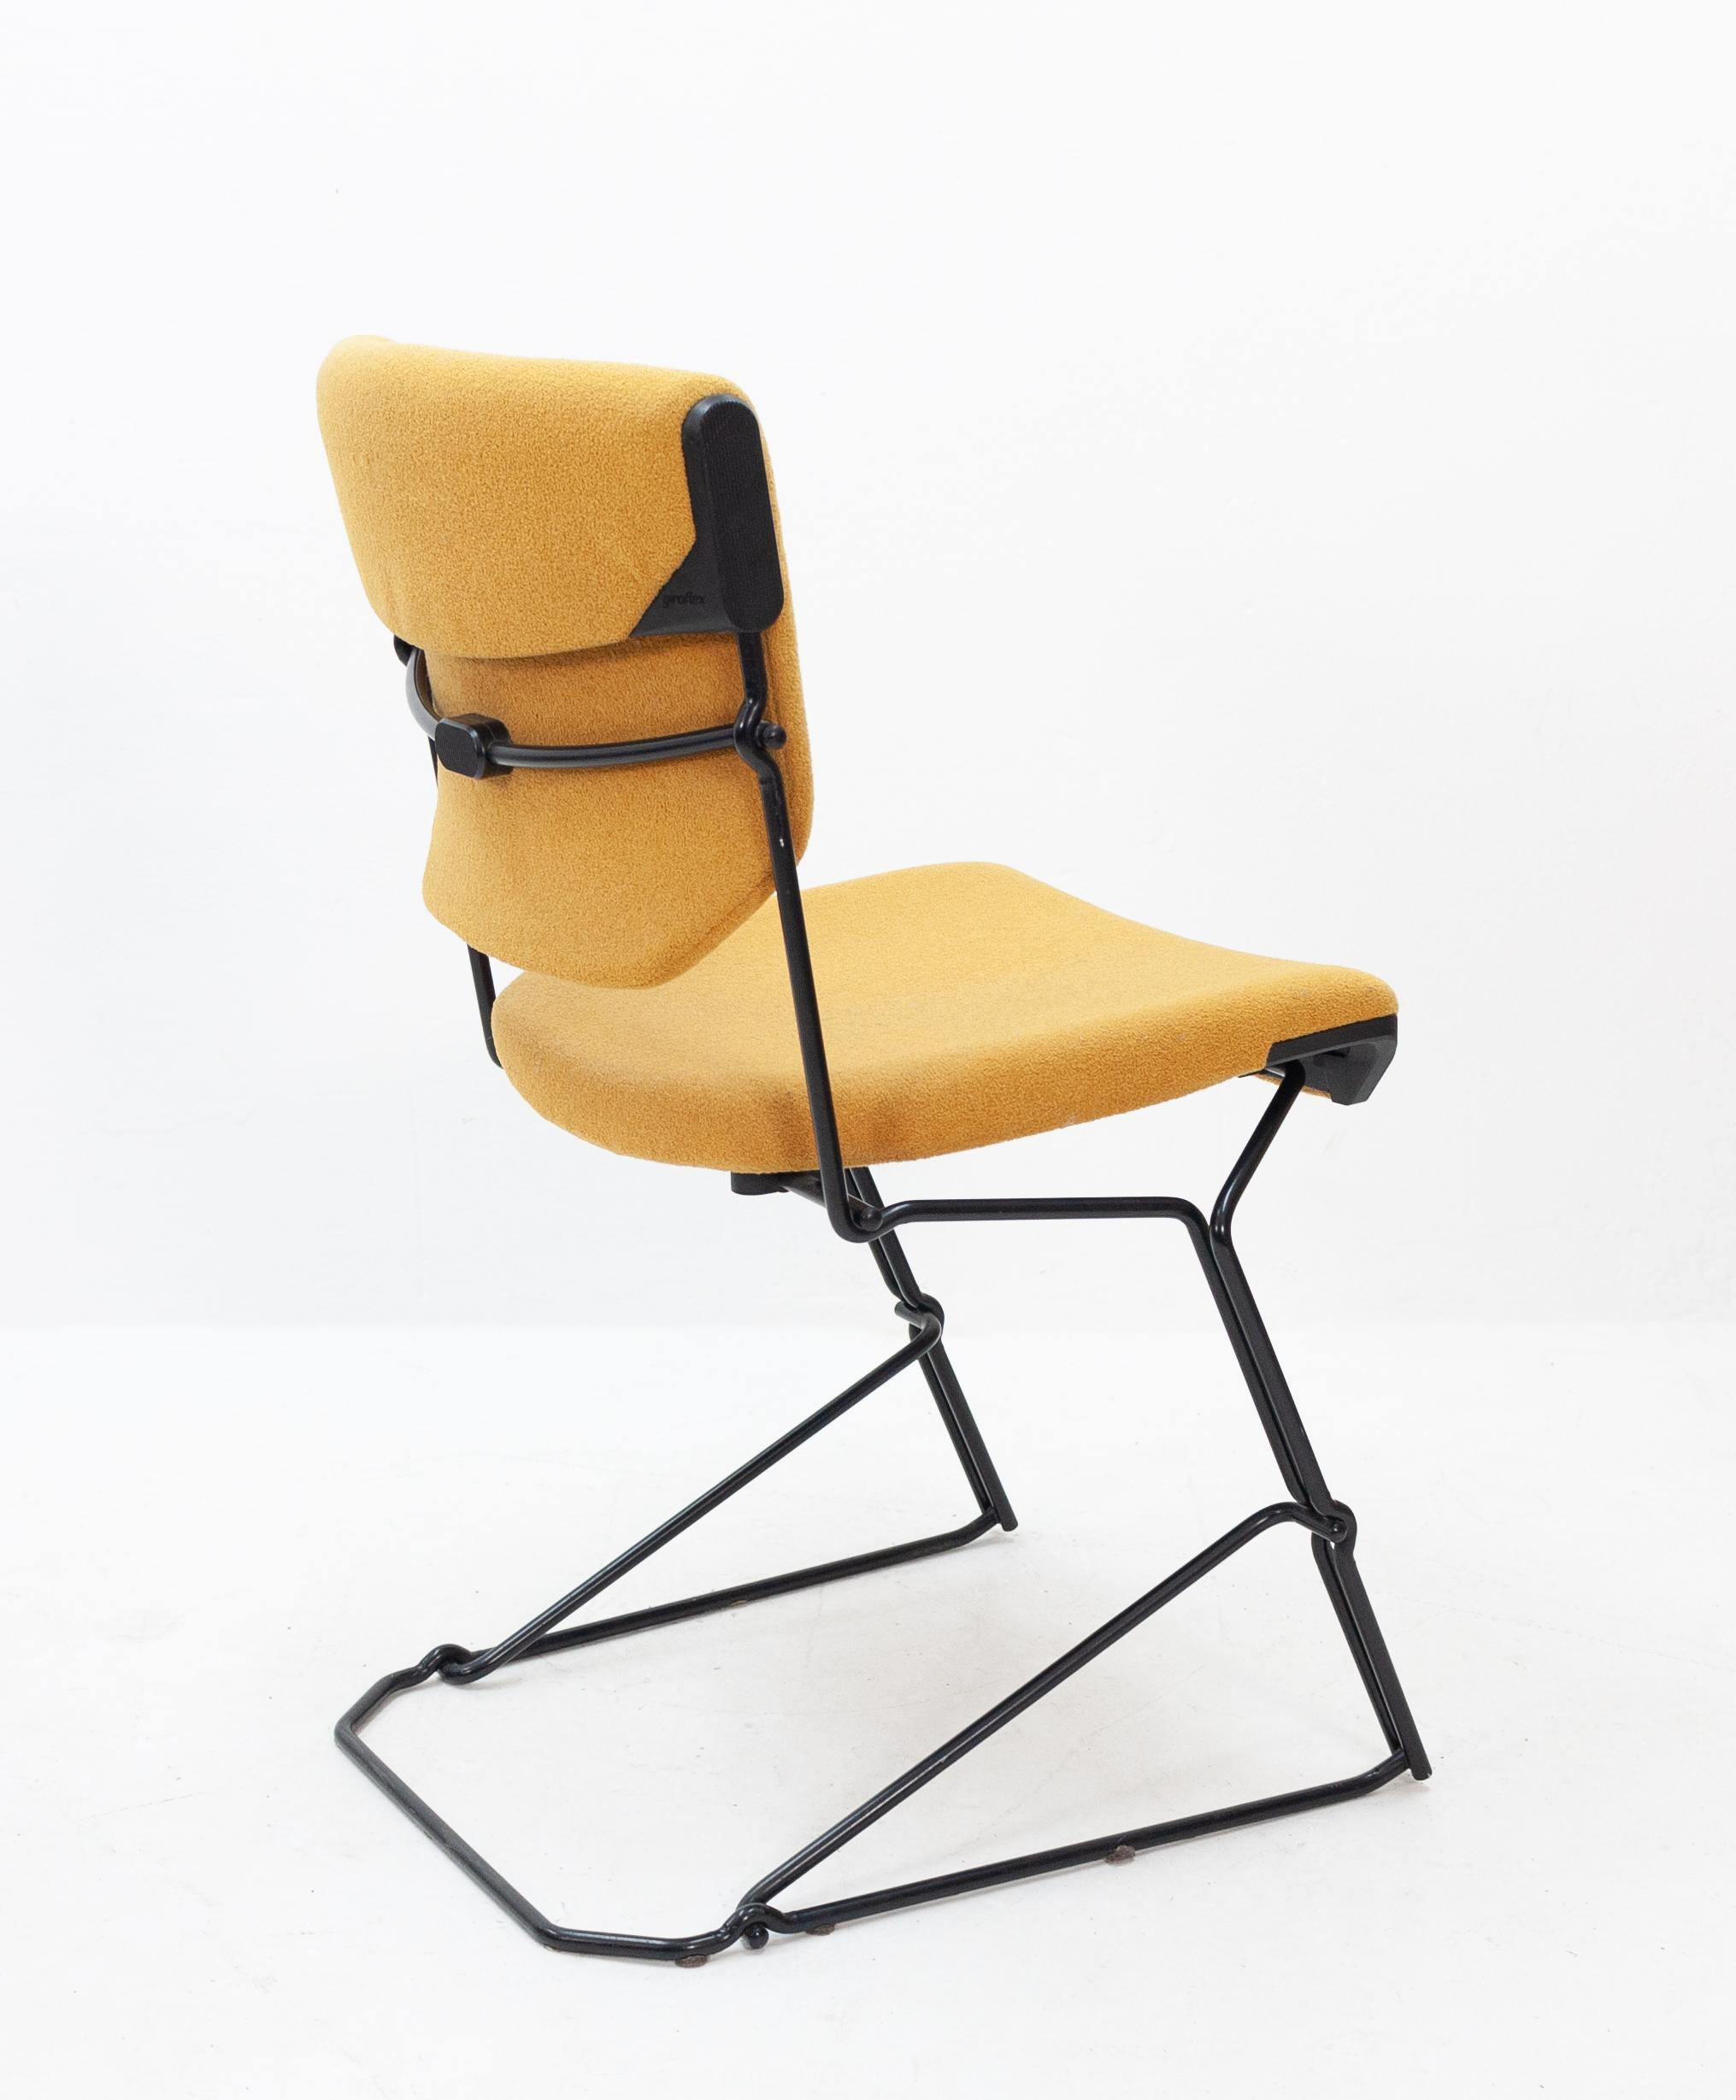 Industrial desk chair. Designed by Albert Stoll for Giroflex, Switzerland. Very well designed
chair.
Bent steel with the original mustard yellow upholstery from the 1970s.